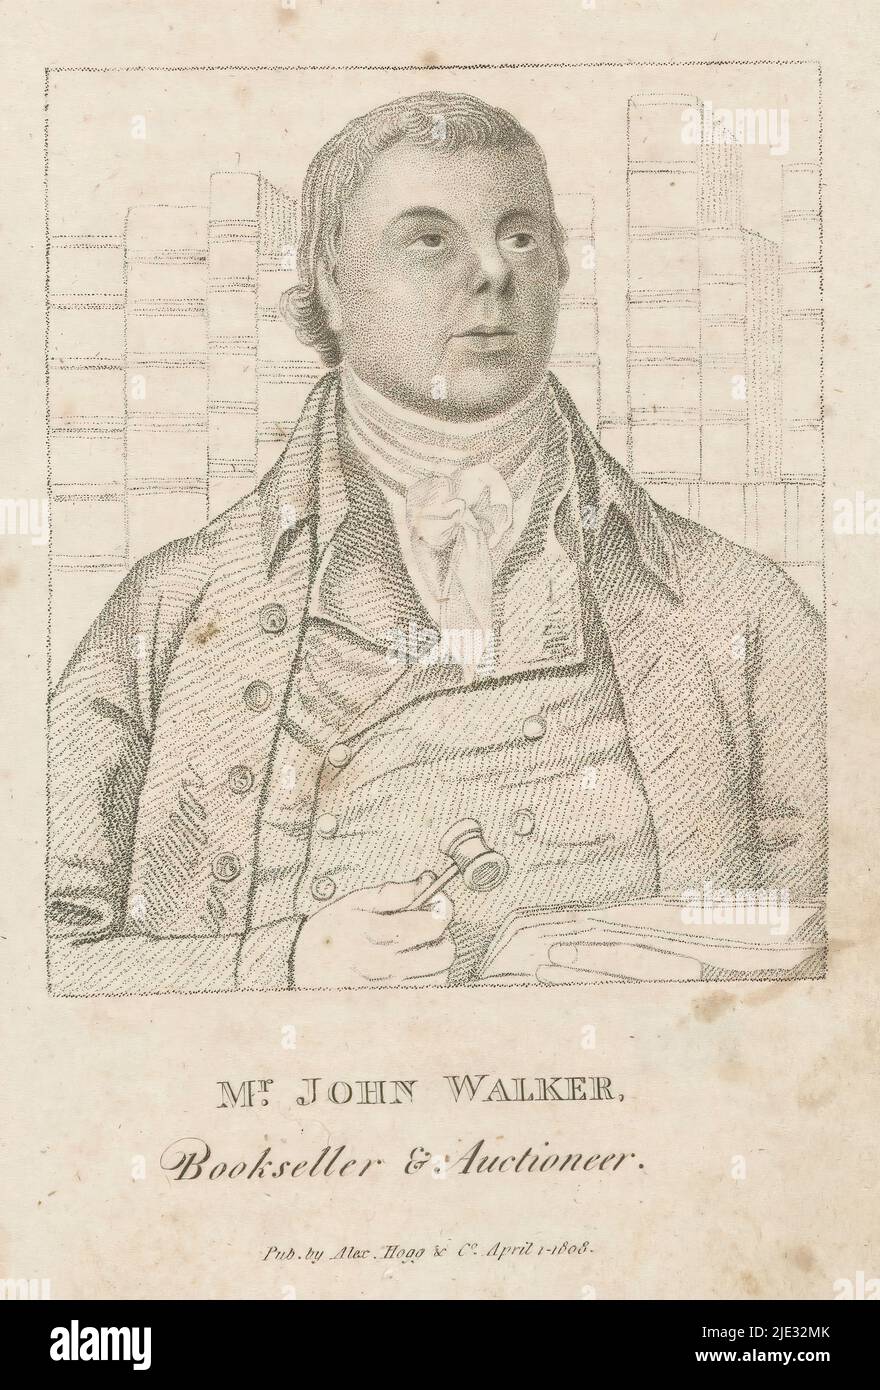 Portrait of bookseller and auctioneer John Walker, Mr. John Walker, Bookseller & Auctioneer (title on object), Portrait of Walker in front of a bookcase, in his hands an auction hammer and a piece of paper., print maker: anonymous, after print by: William Ridley, (possibly), after painting by: Samuel Drummond, (possibly), London, 1808, paper, height 209 mm × width 125 mm Stock Photo